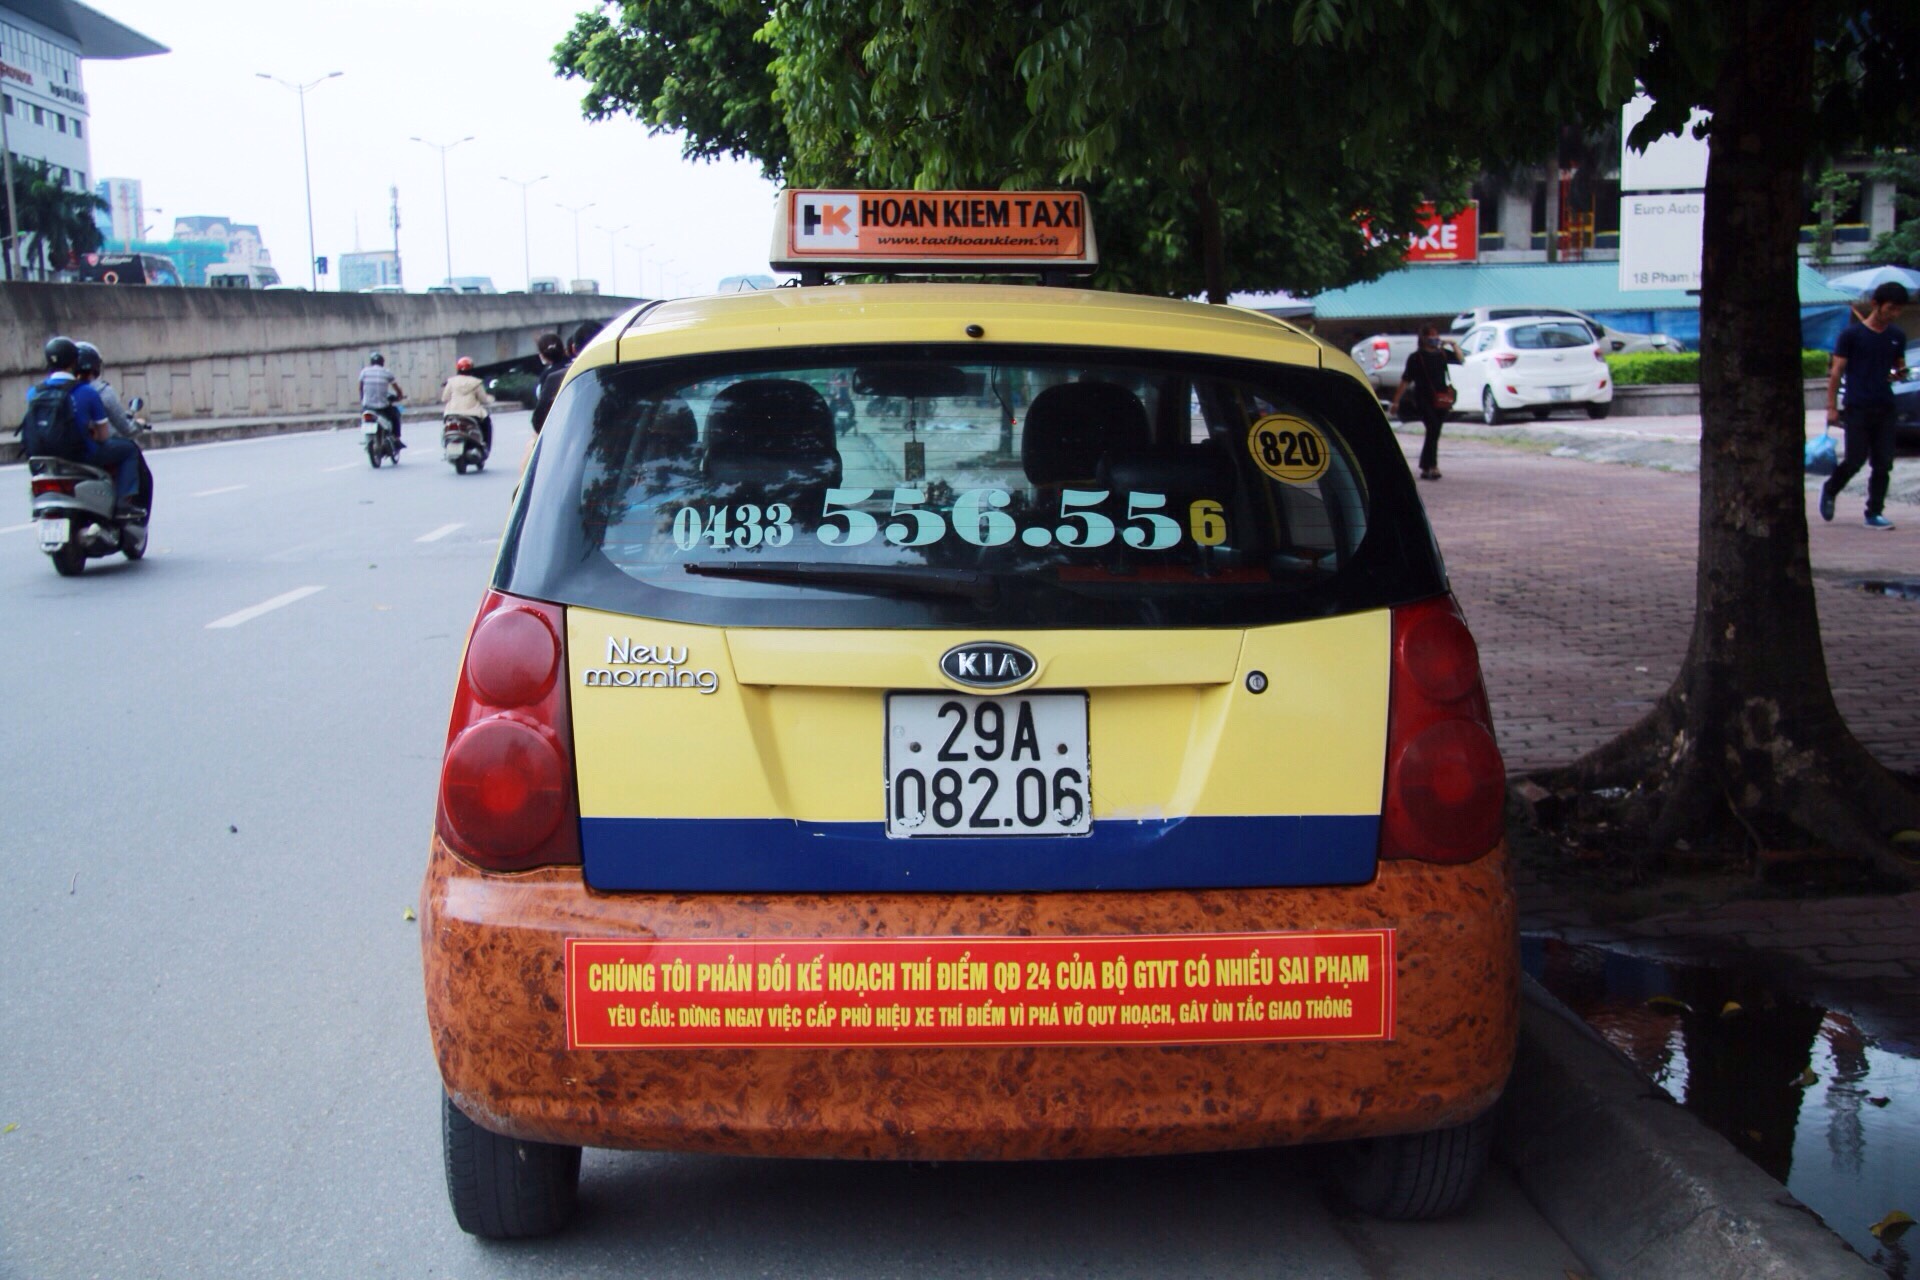 ​Hanoi taxis protest Grab, Uber with bumper stickers